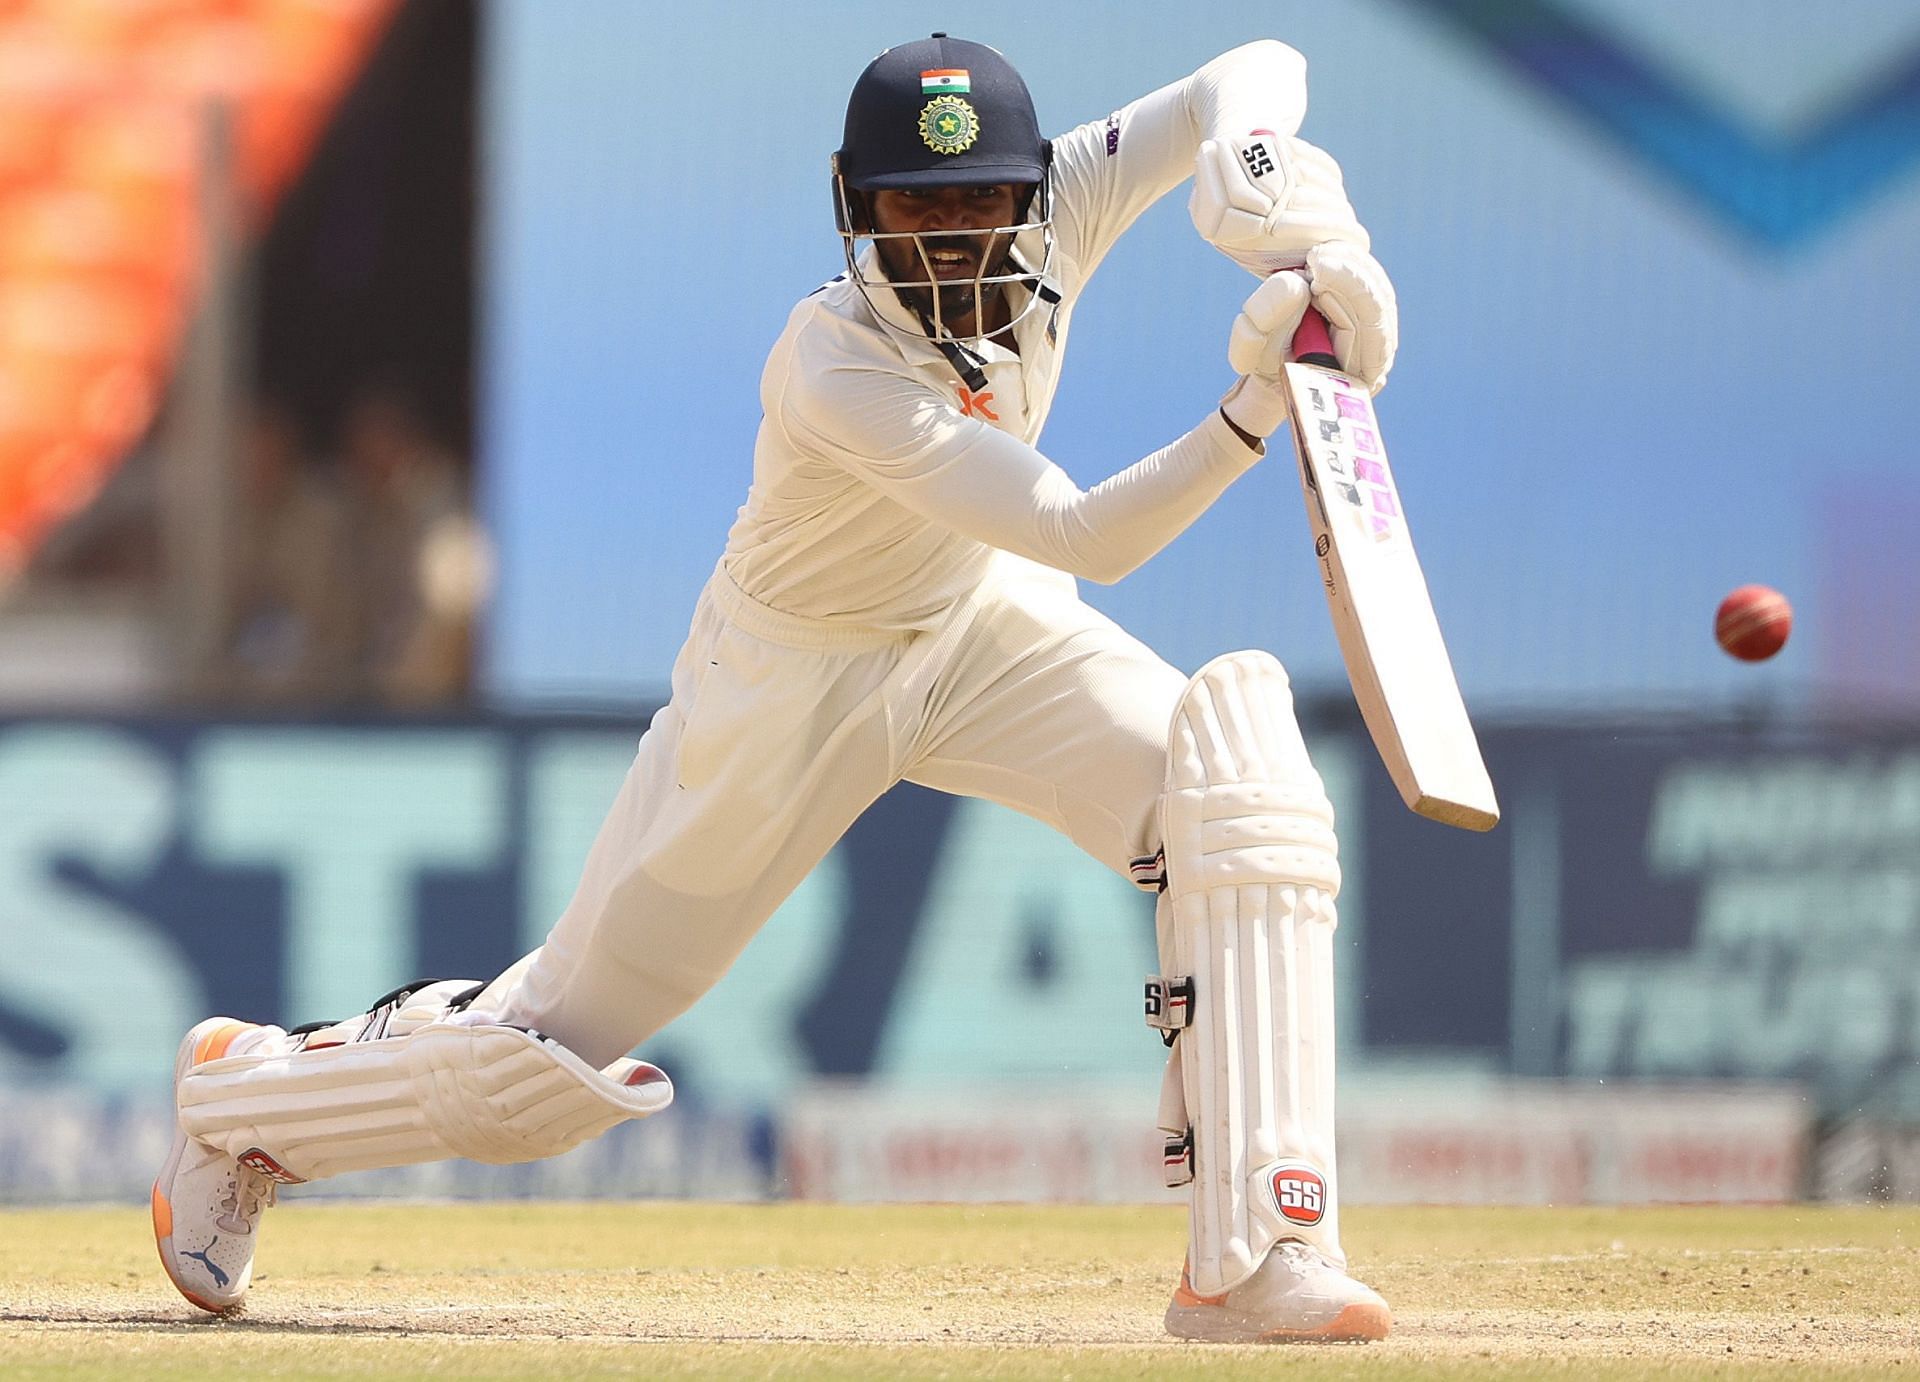 KS Bharat has struggled to make an impact with the bat. (Pic: Getty Images)